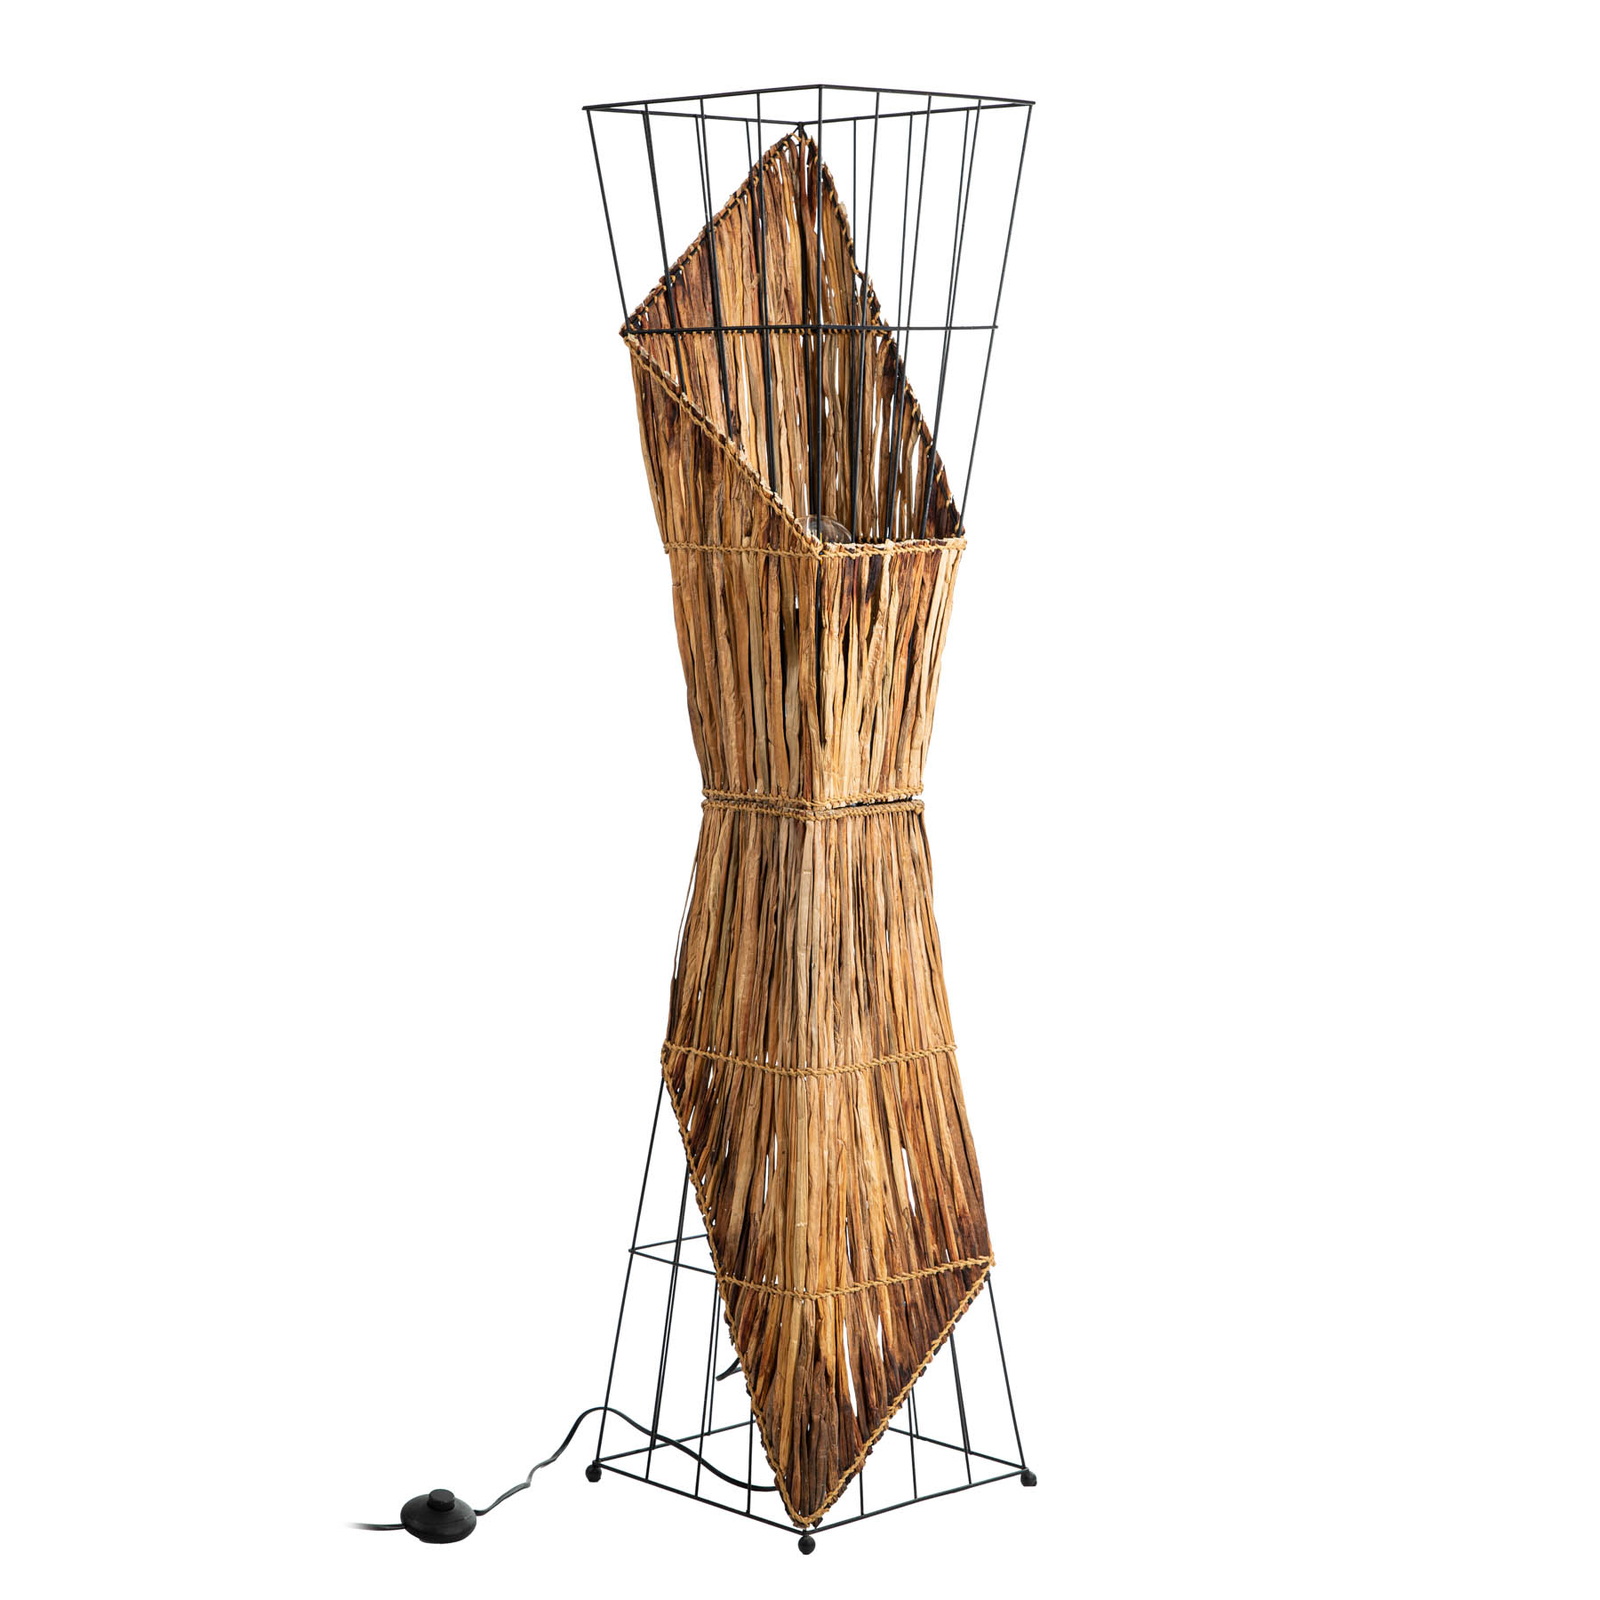 Rinca floor lamp, wire shade with grass weave